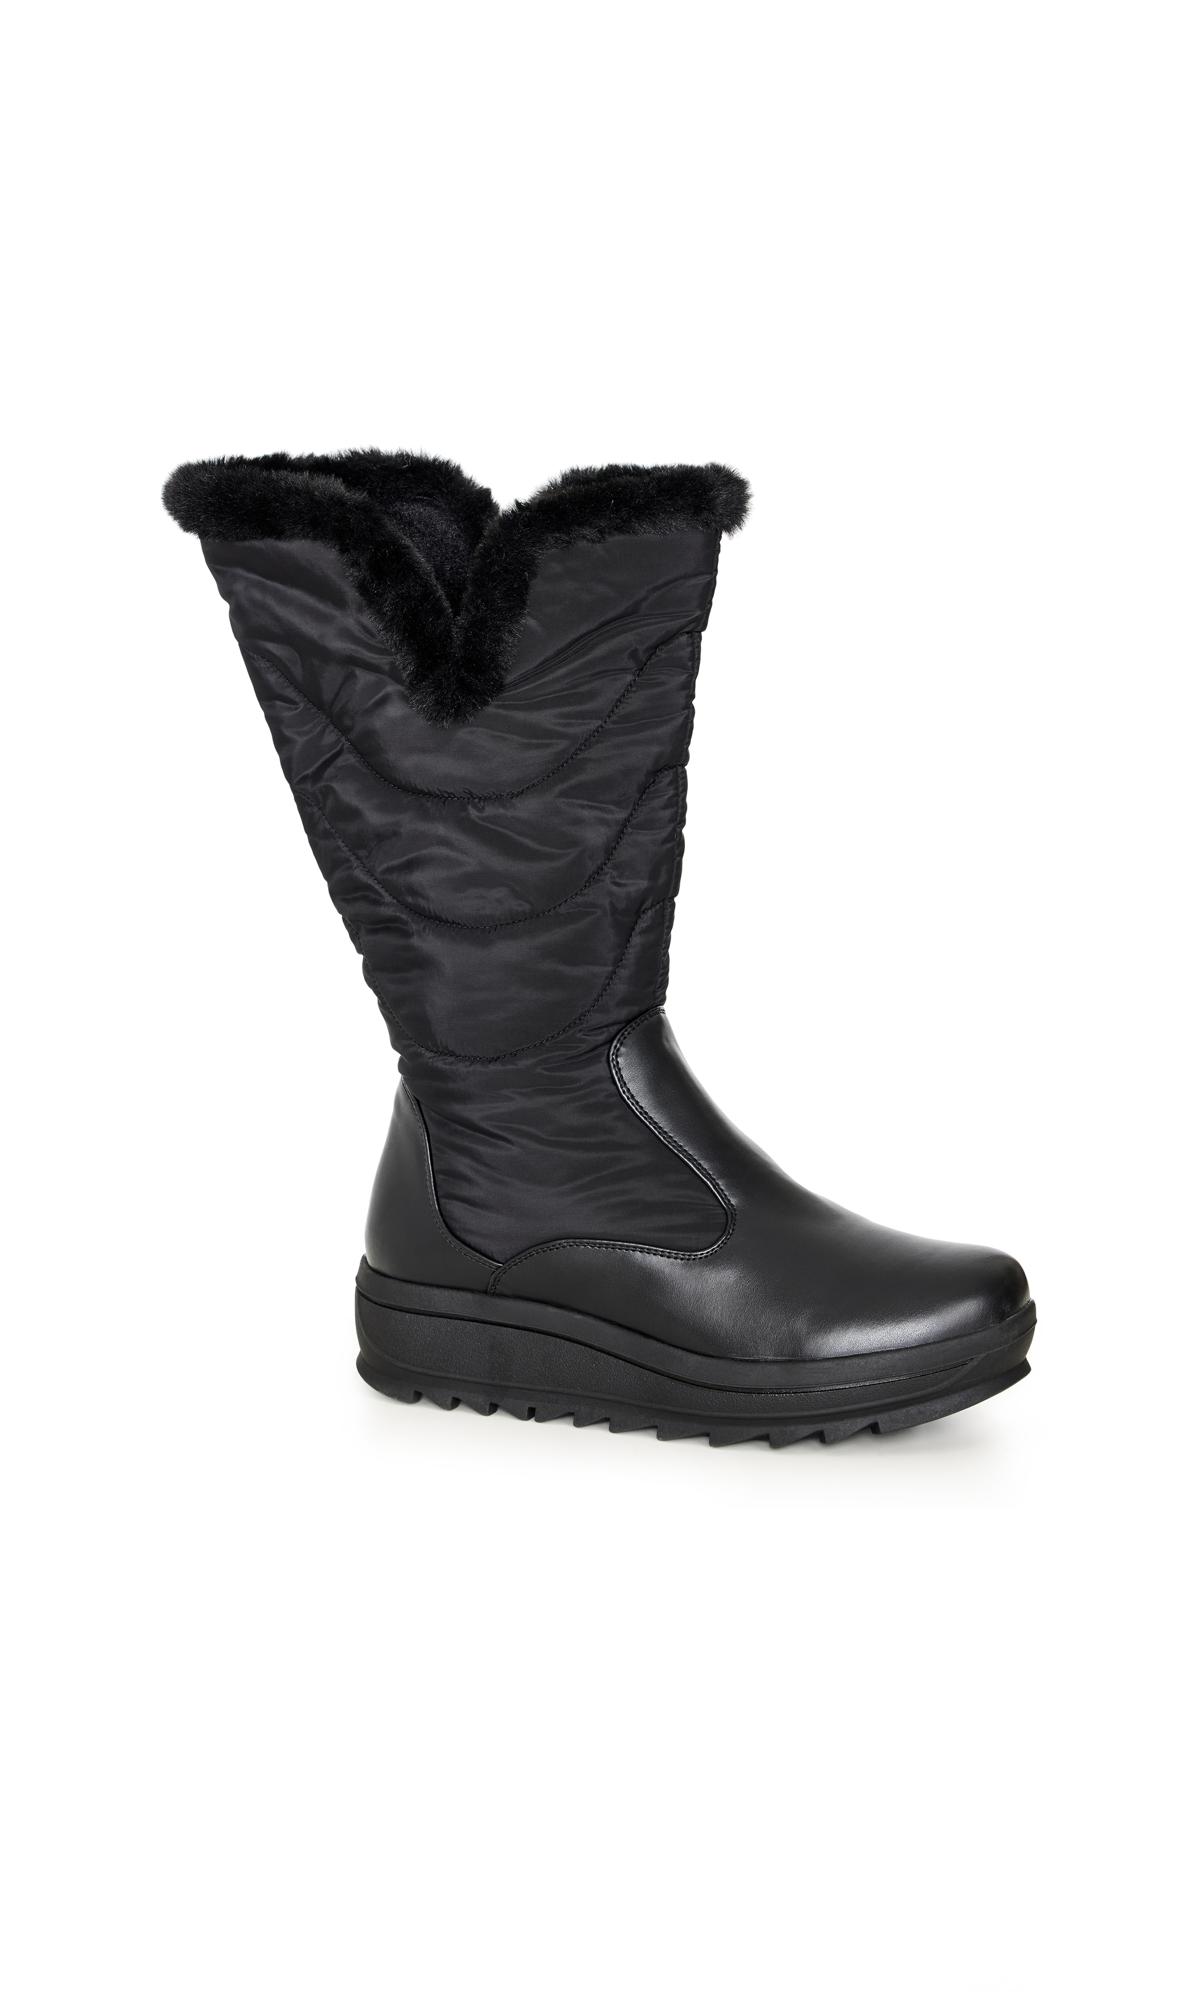 Gianna Black Wide Fit Winter Boot 3